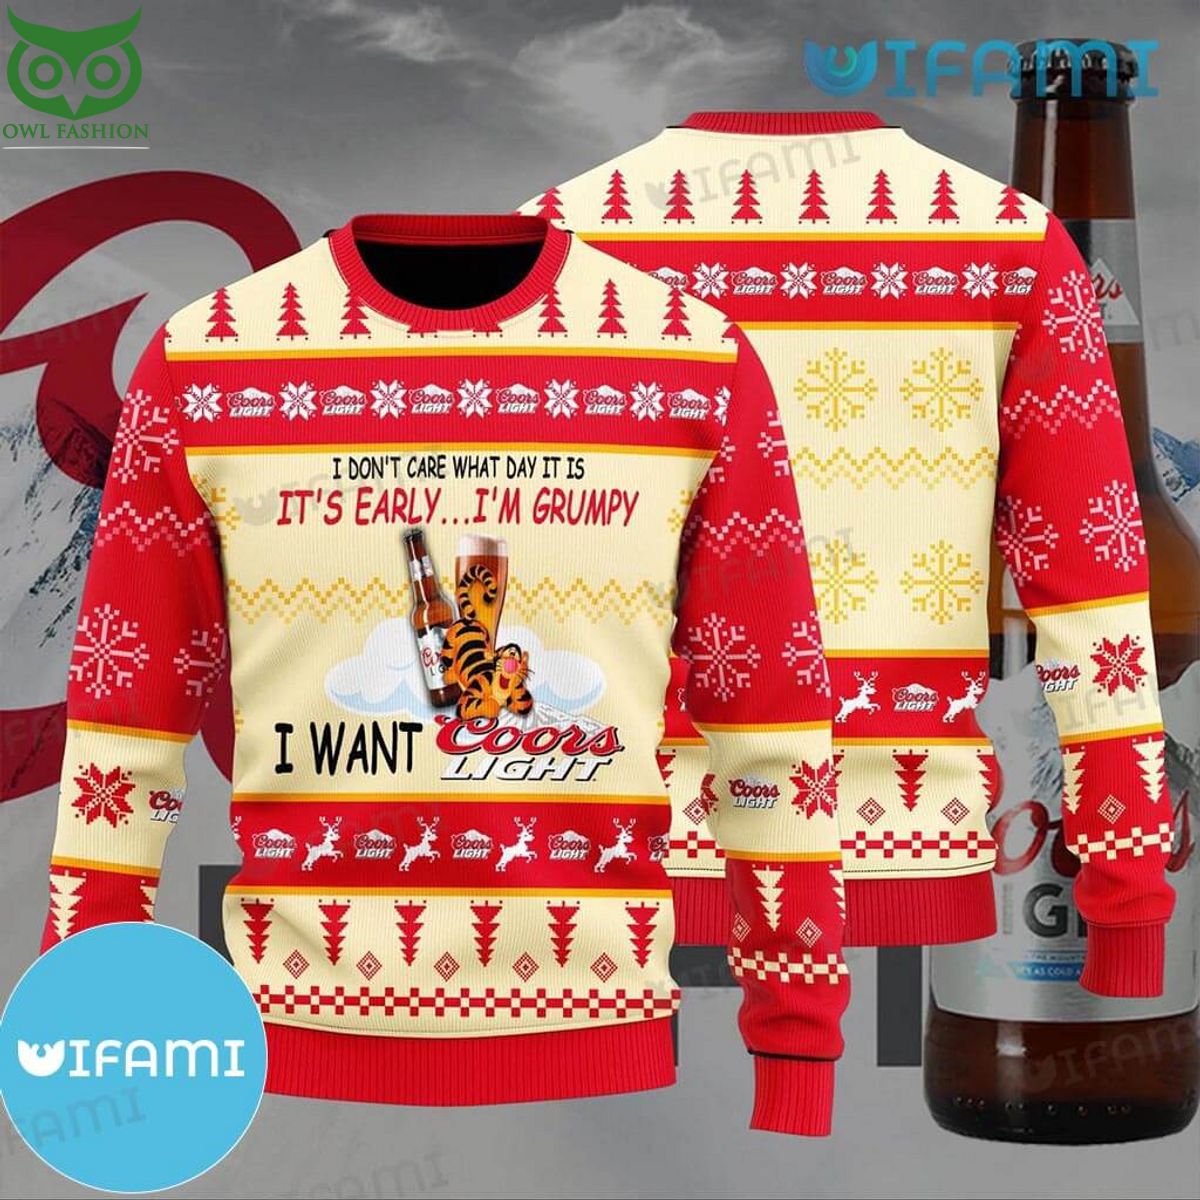 coors light ugly sweater tigger gift for beer lovers 1 lMpjb.jpg